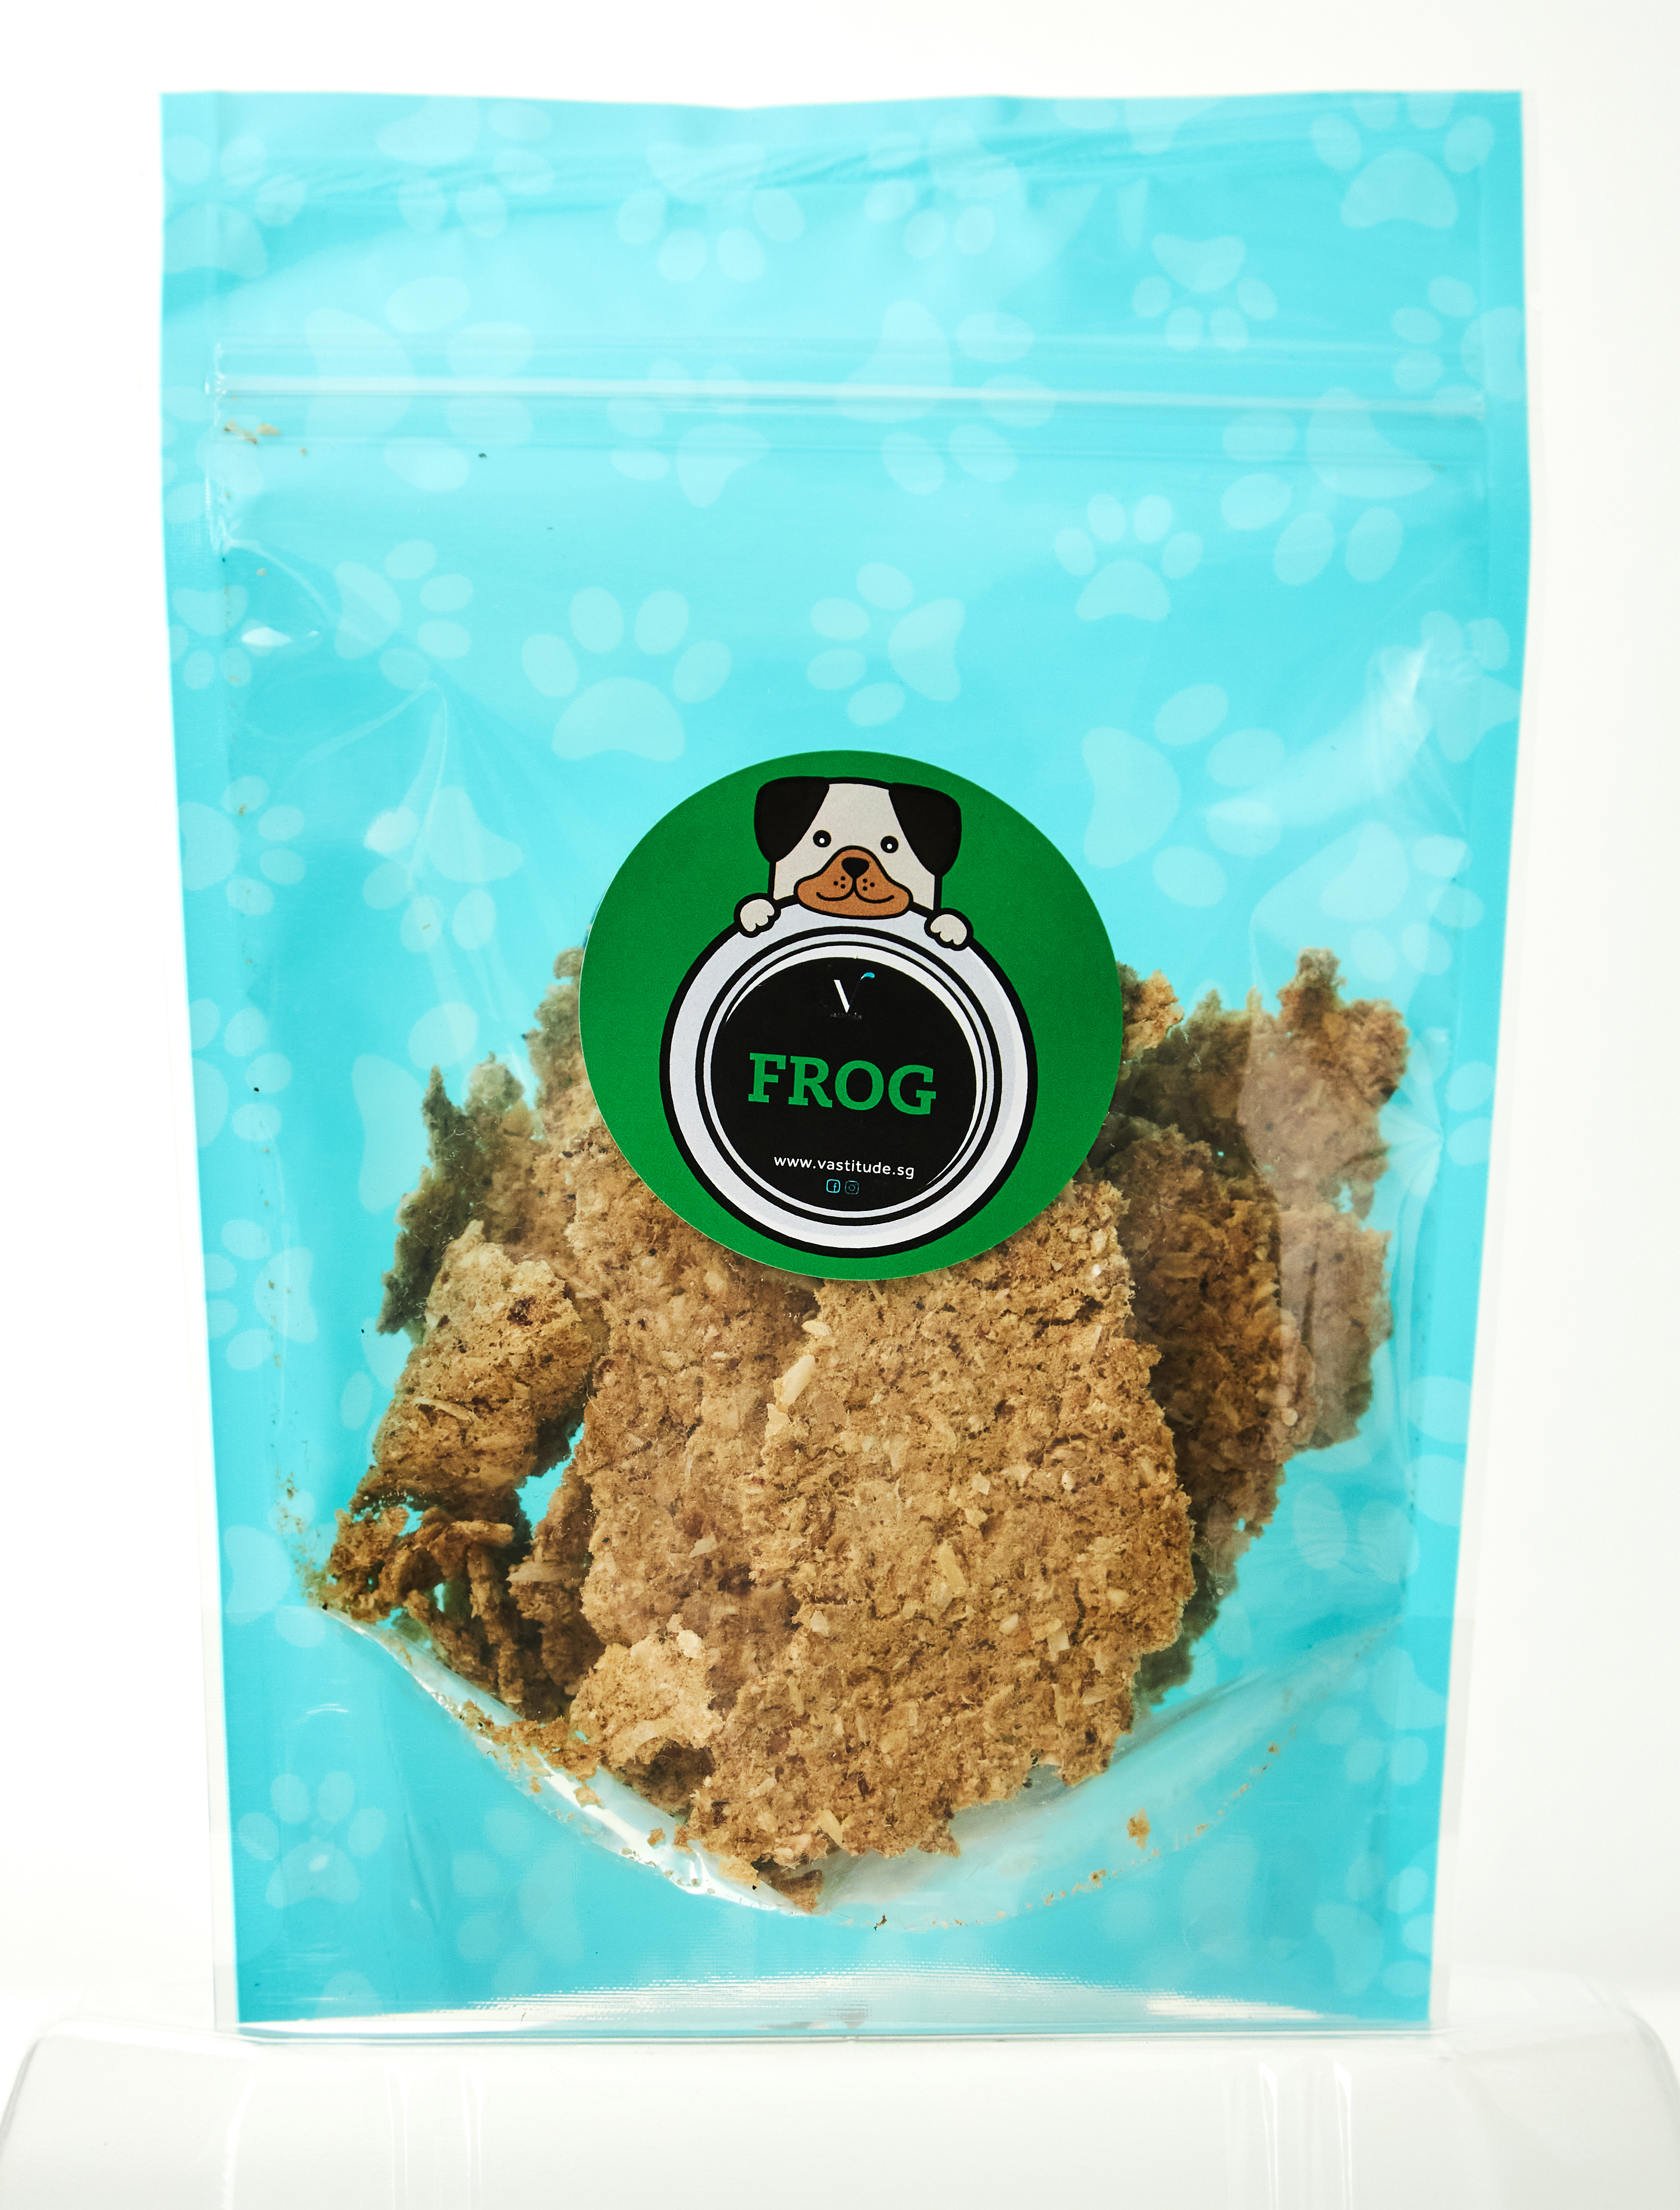 NEW! Slow Roasted Frog Legs (40g)